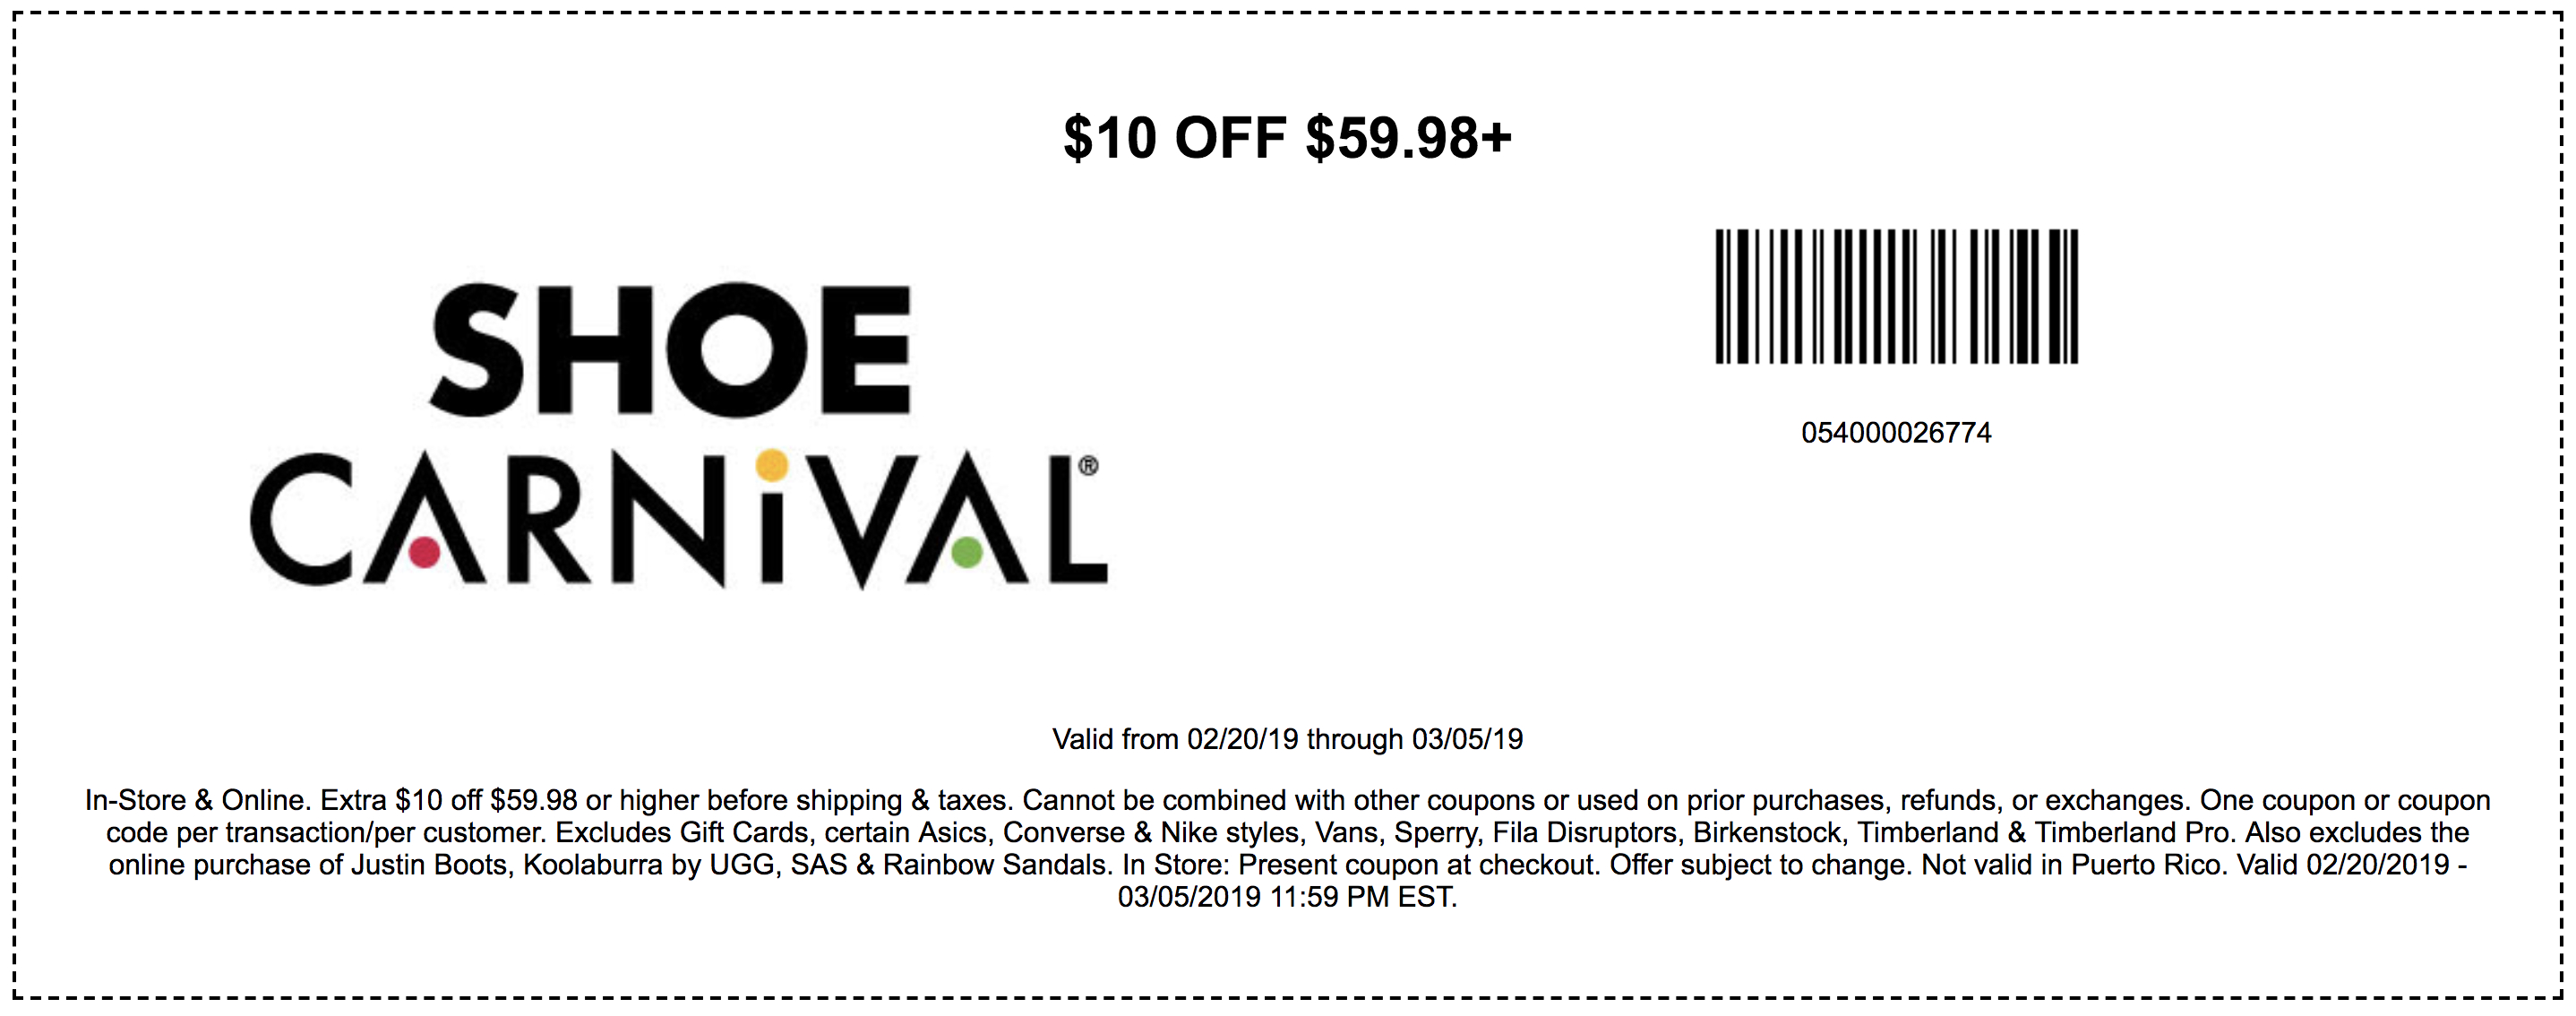 Shoe Carnival Coupons In Store (Printable Coupons) - 2019 - Free Printable Coupons For Dsw Shoes